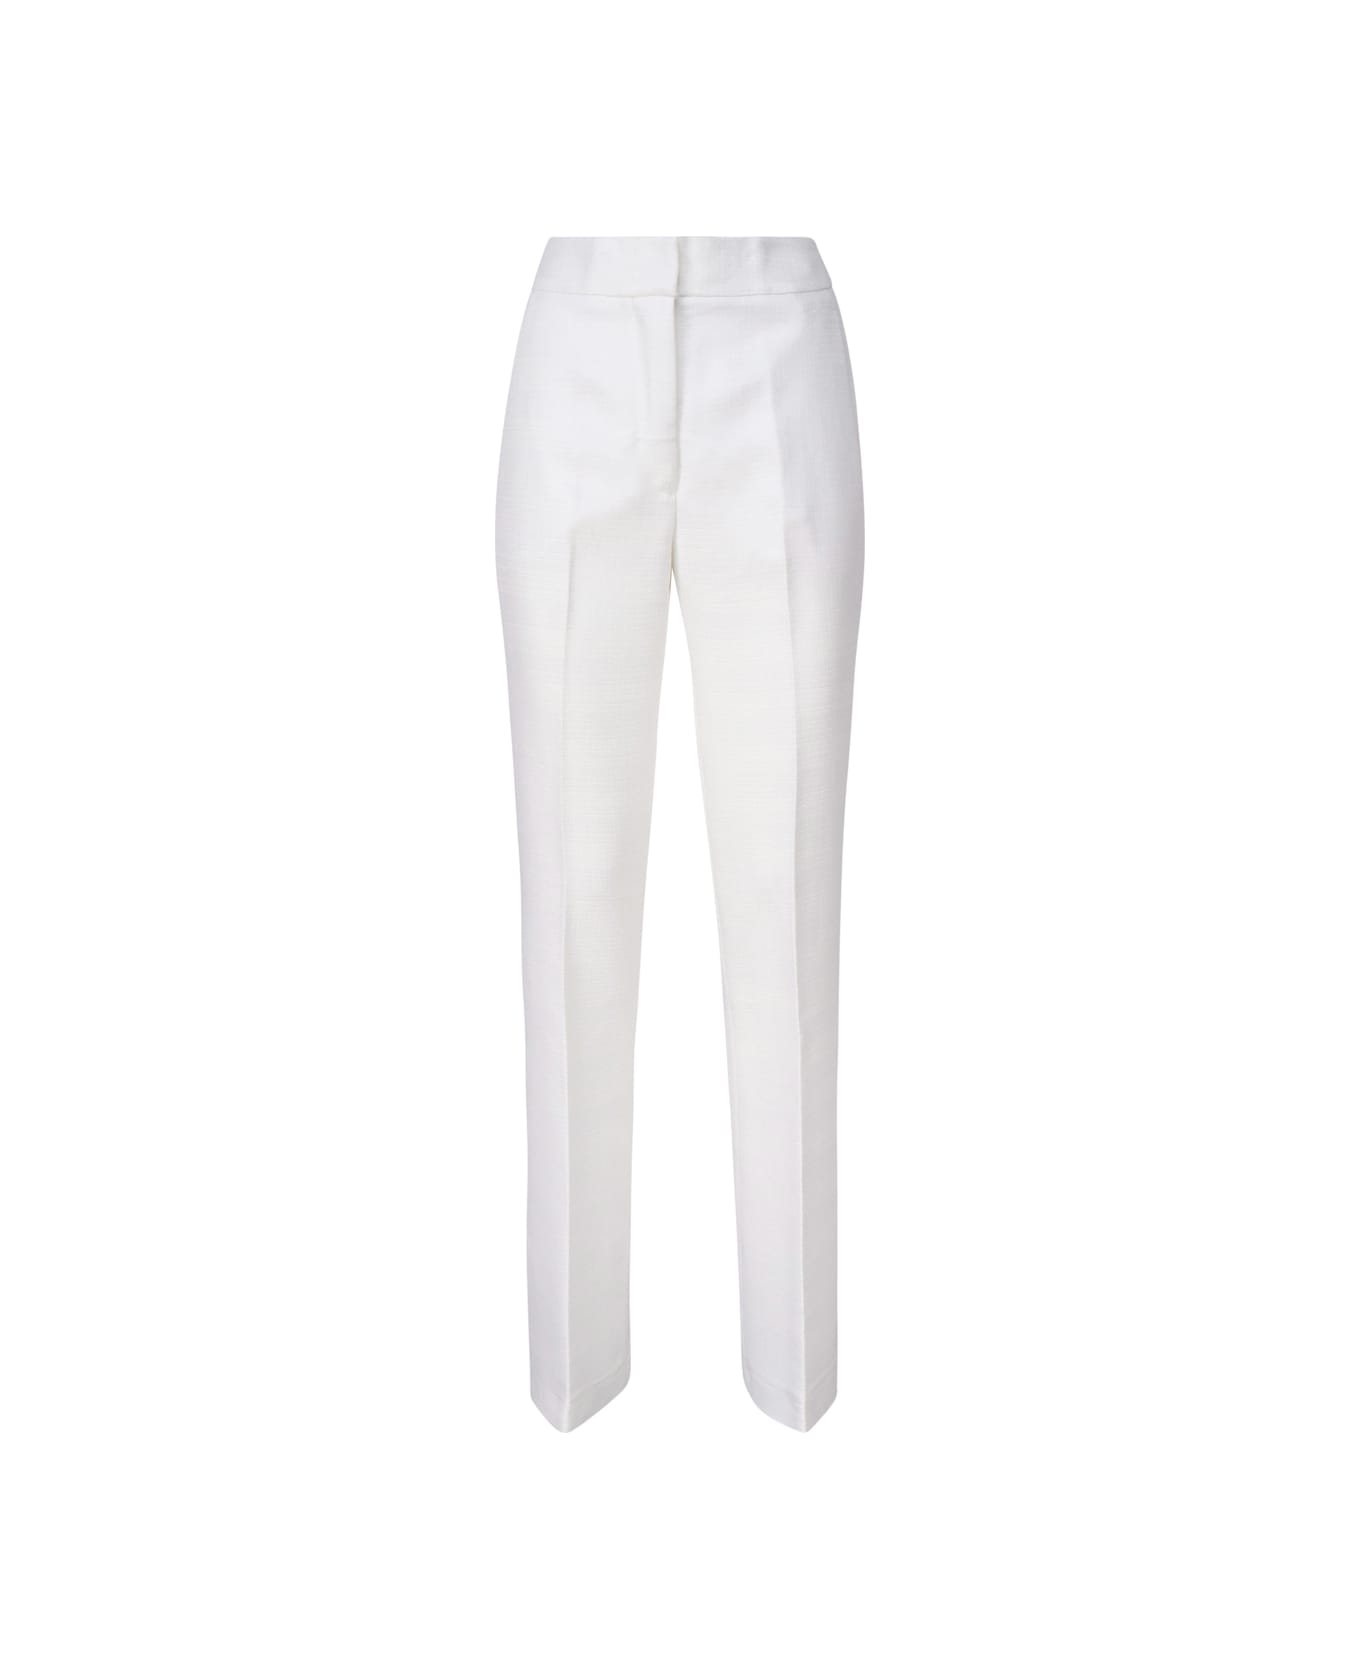 Genny Viscose Tailored Pants - White